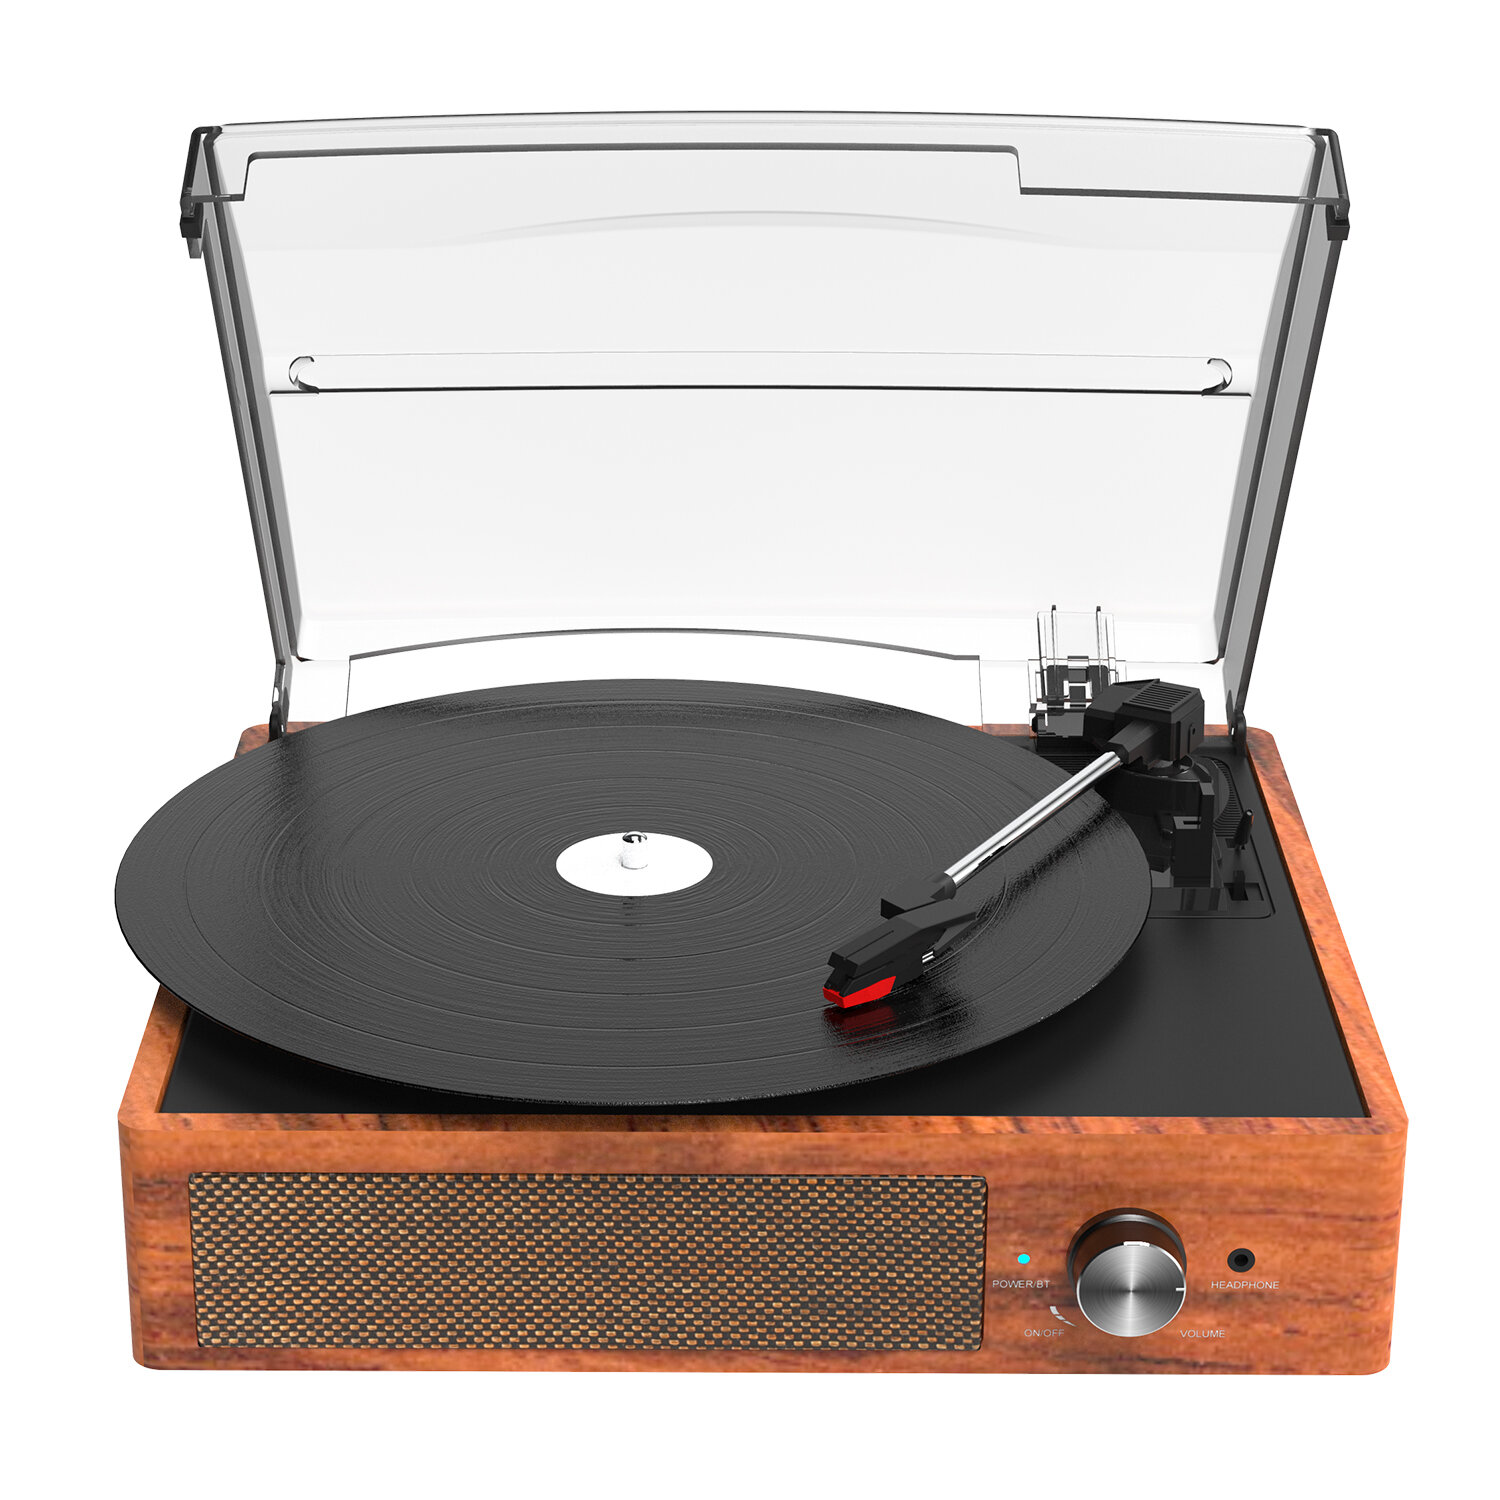 DIGITNOW 7545883392 Bluetooth Record Player Turntable for sale online